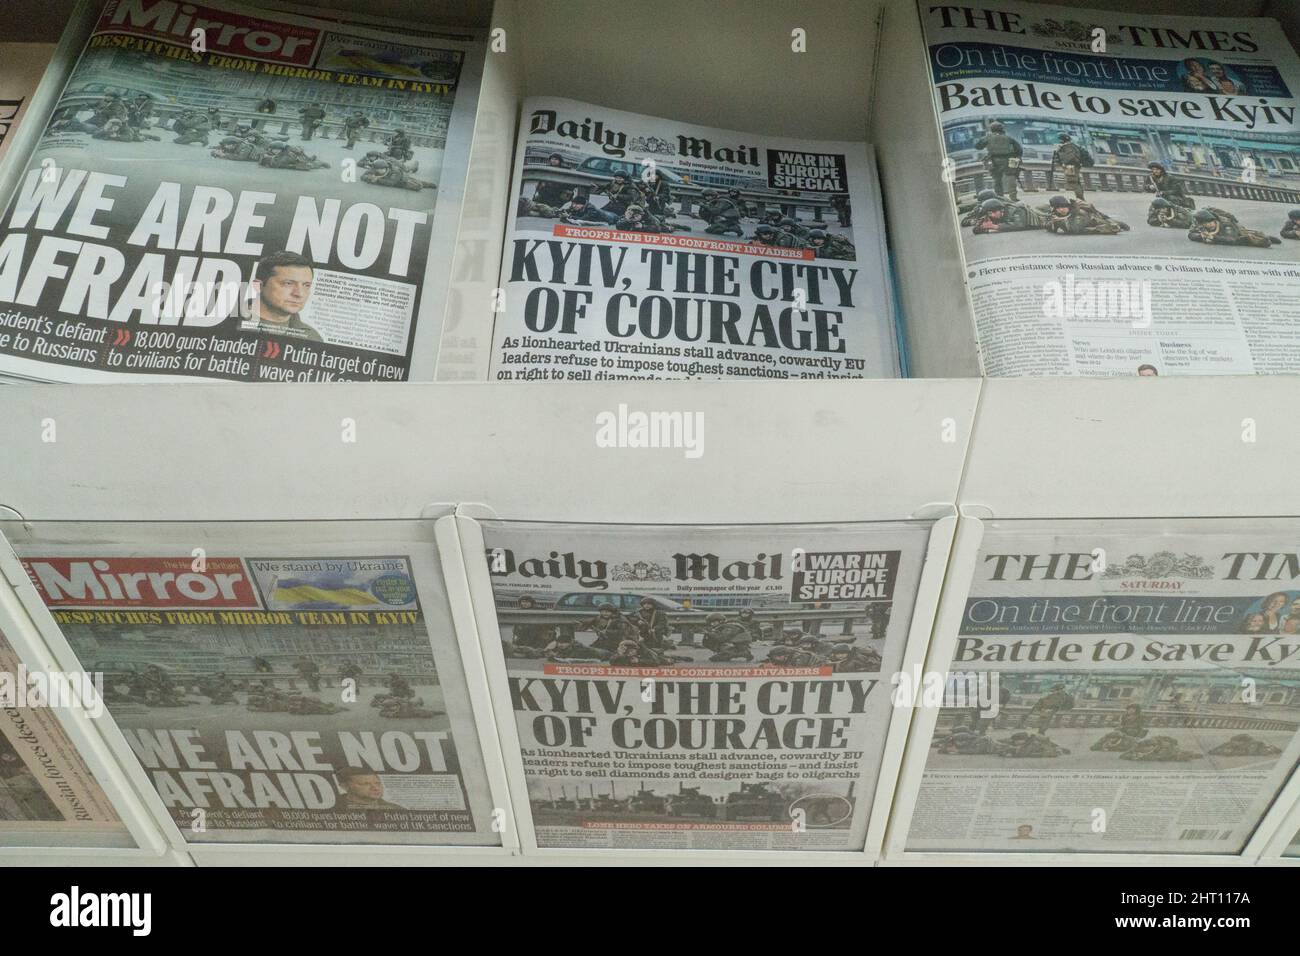 London, UK, 26 February 2022: In a supermarket newspaper rack the front pages of the British national press all display support and sympathy for Ukraine and the Ukrainian people after Vladimir Putin illegally invaded the country on 24 February 2022. The Ukrainian army are trying to defend Kyiv and the Russian have been bombing apartment blocks. Anna Watson/Alamy Live News Stock Photo